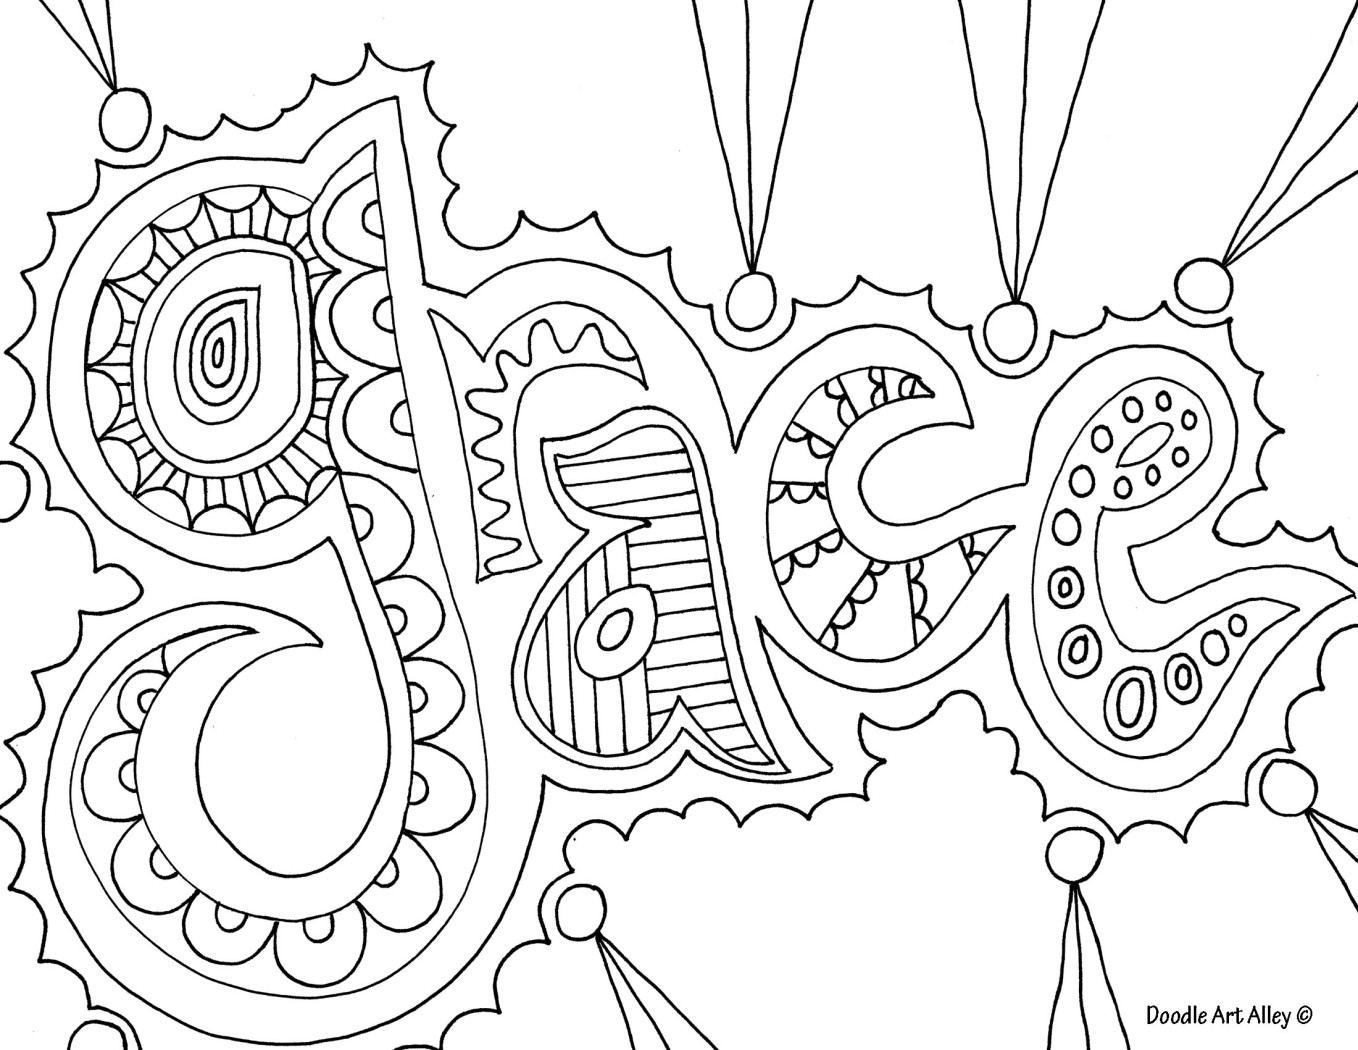 Coloring Pages For Older Students at GetDrawings | Free download